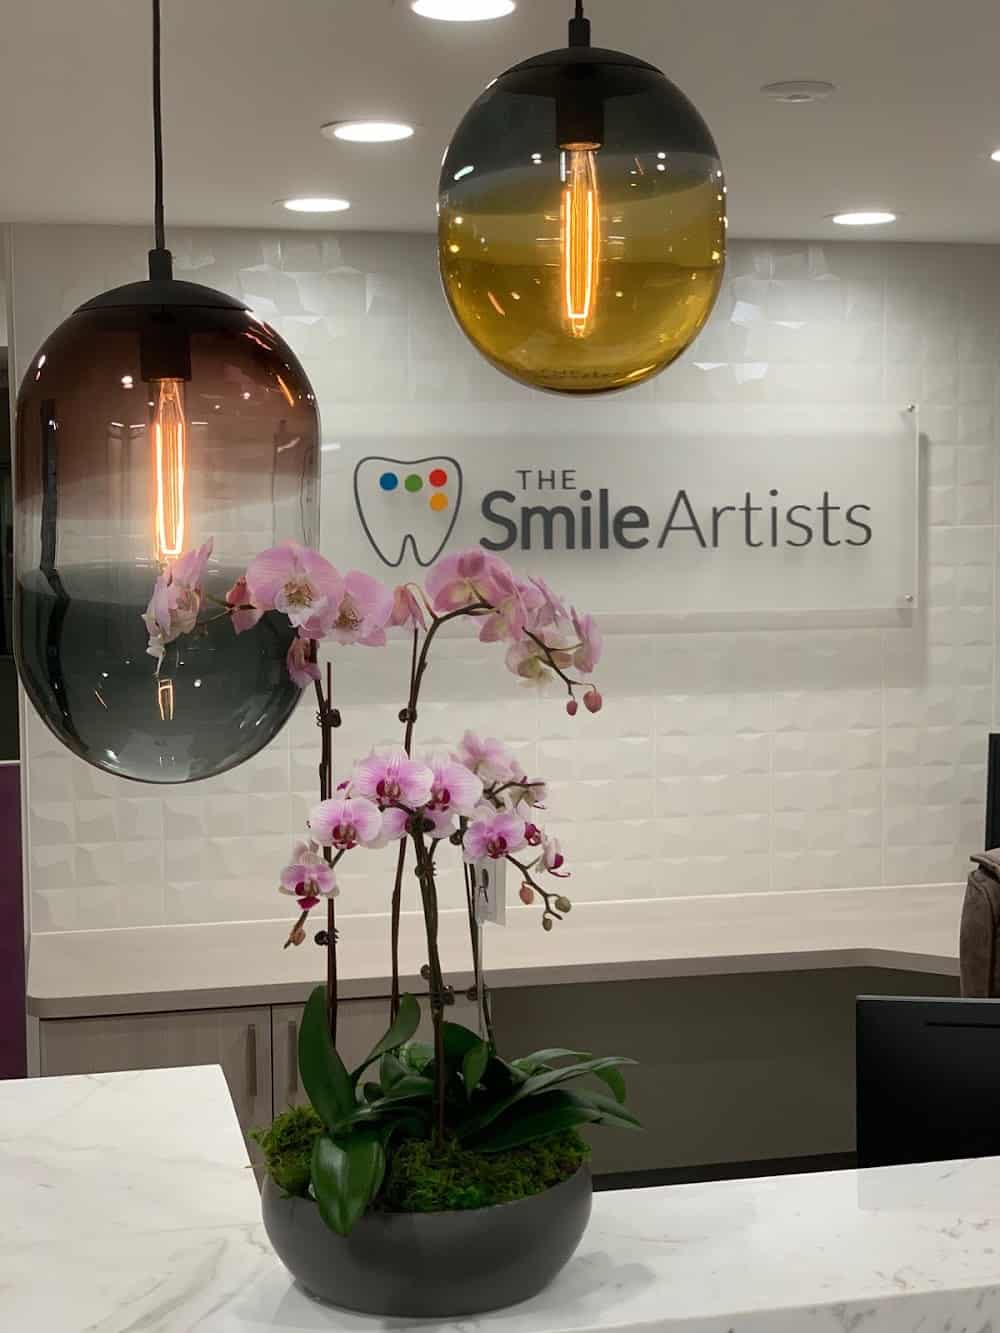 The Smile Artists